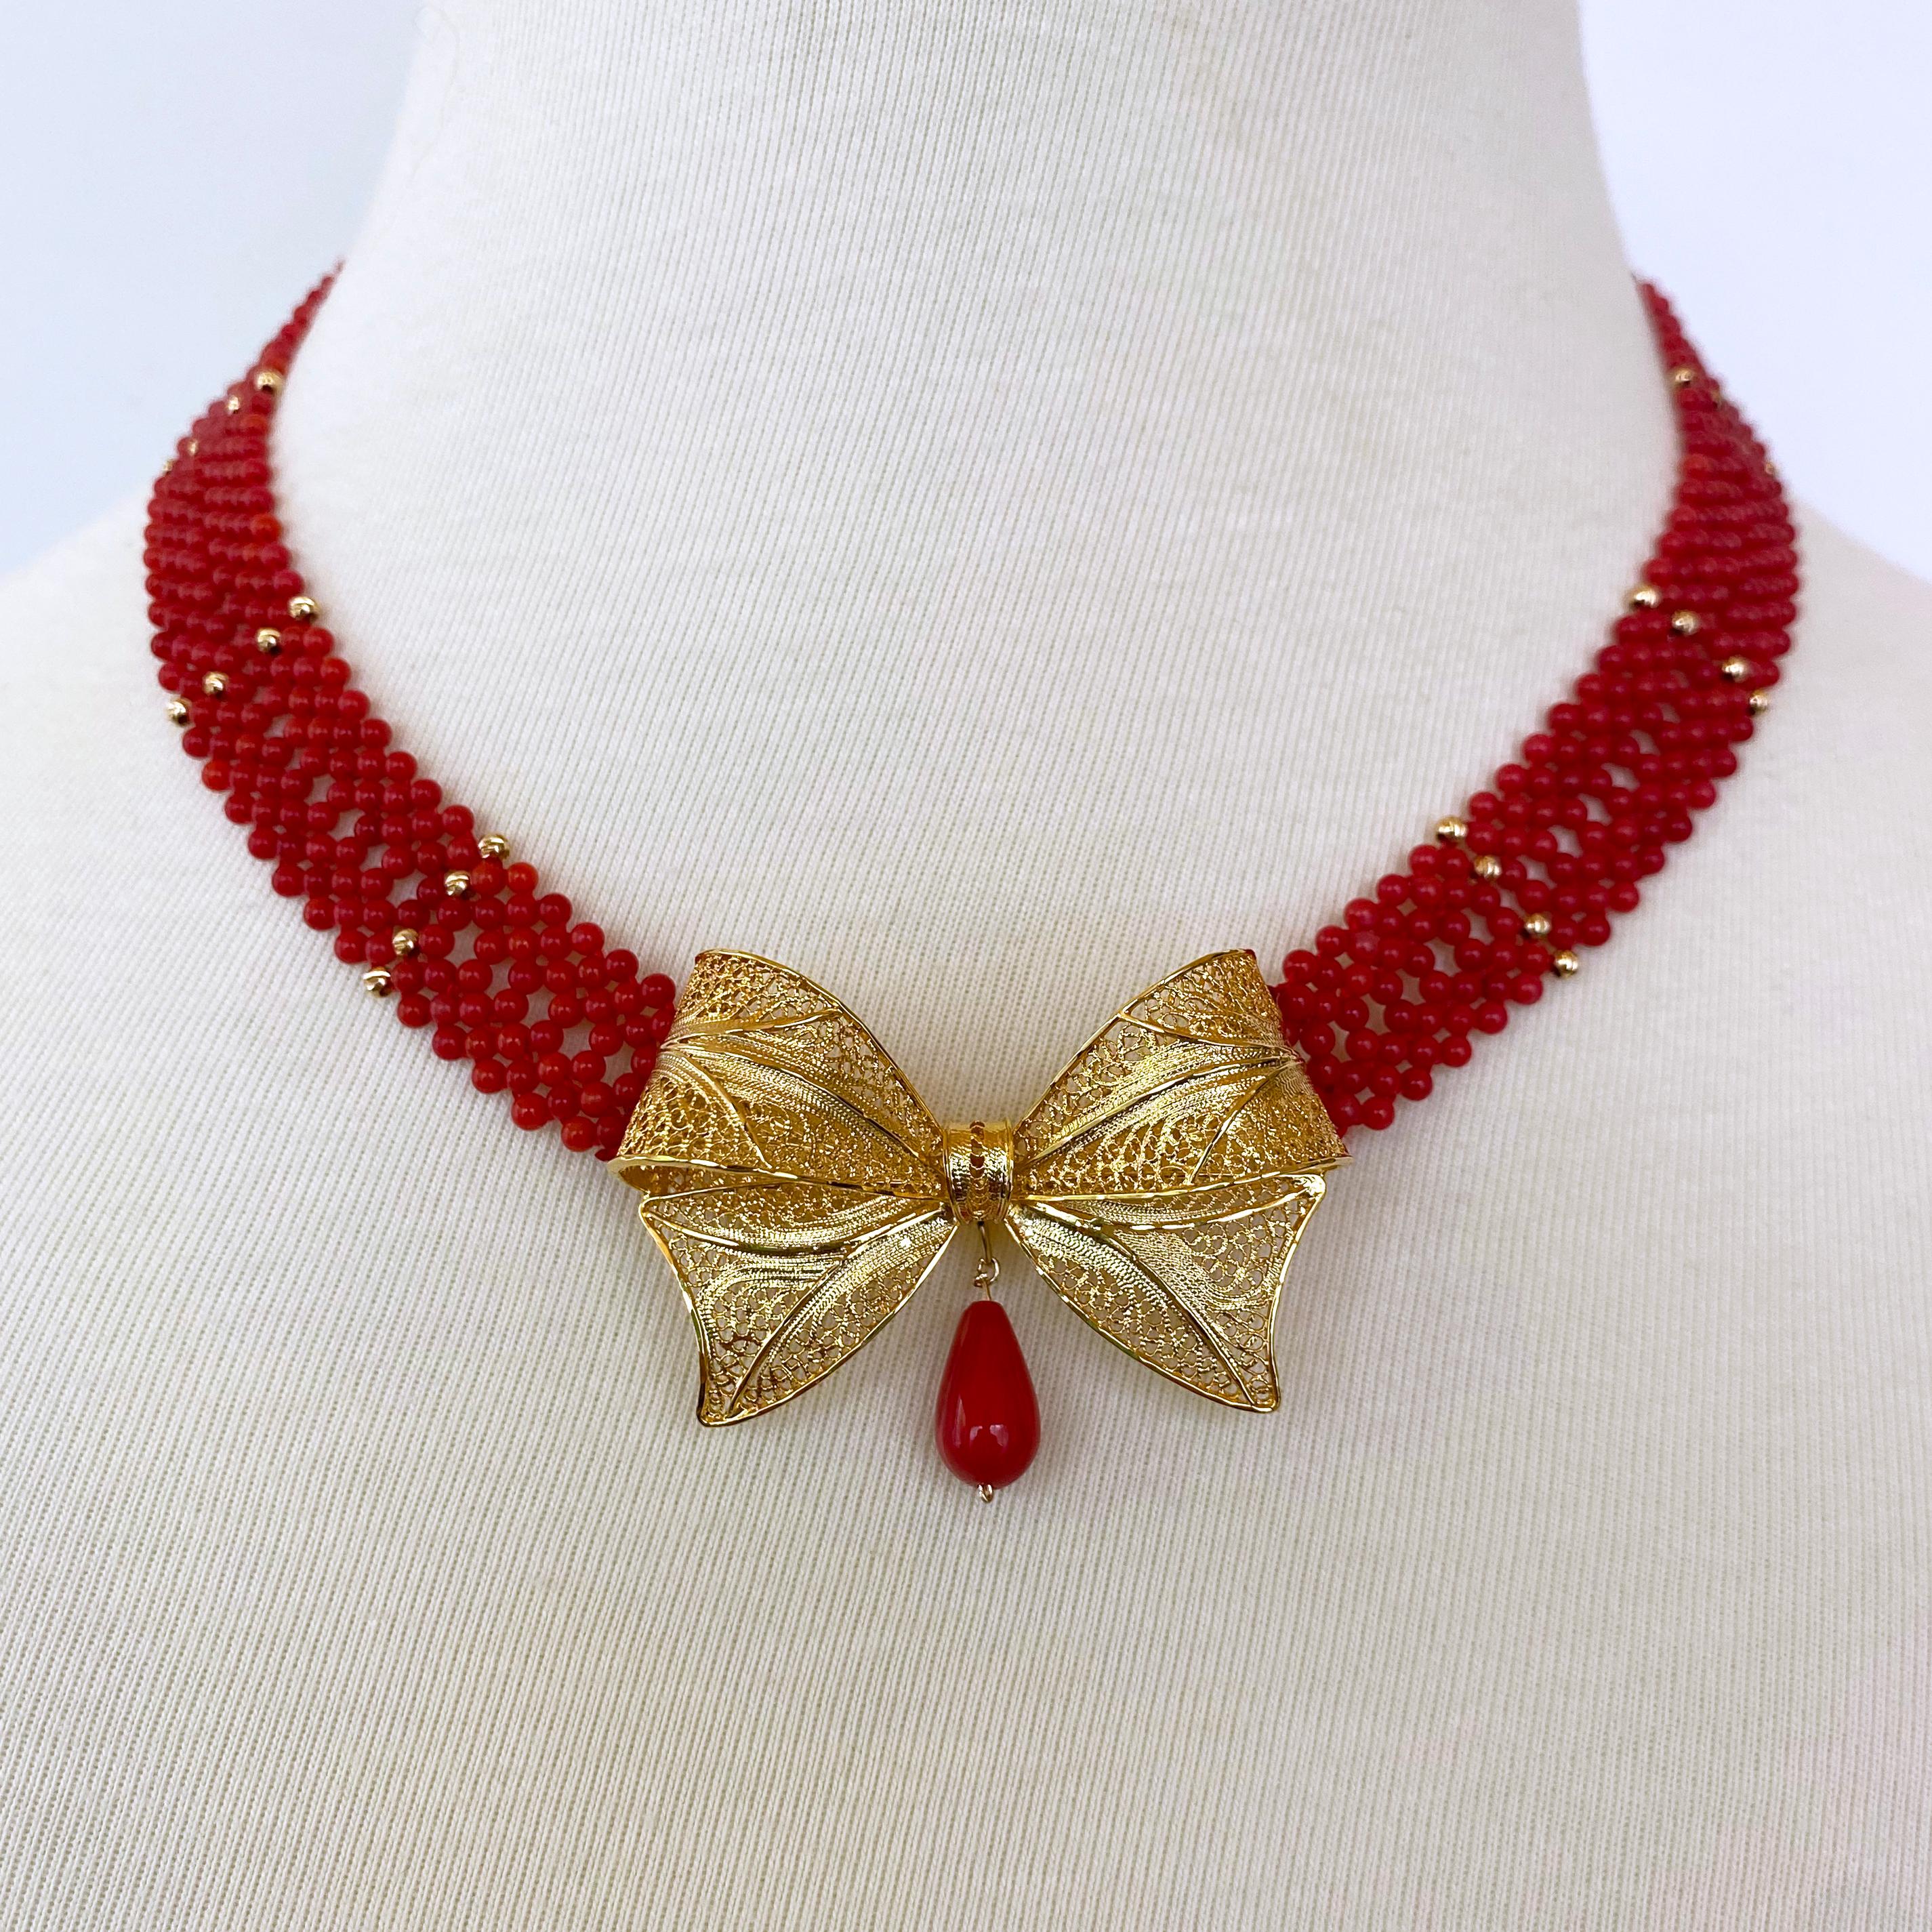 Marina J Coral Woven Necklace with 18k Plated Bowtie Centerpiece & Detailings For Sale 2